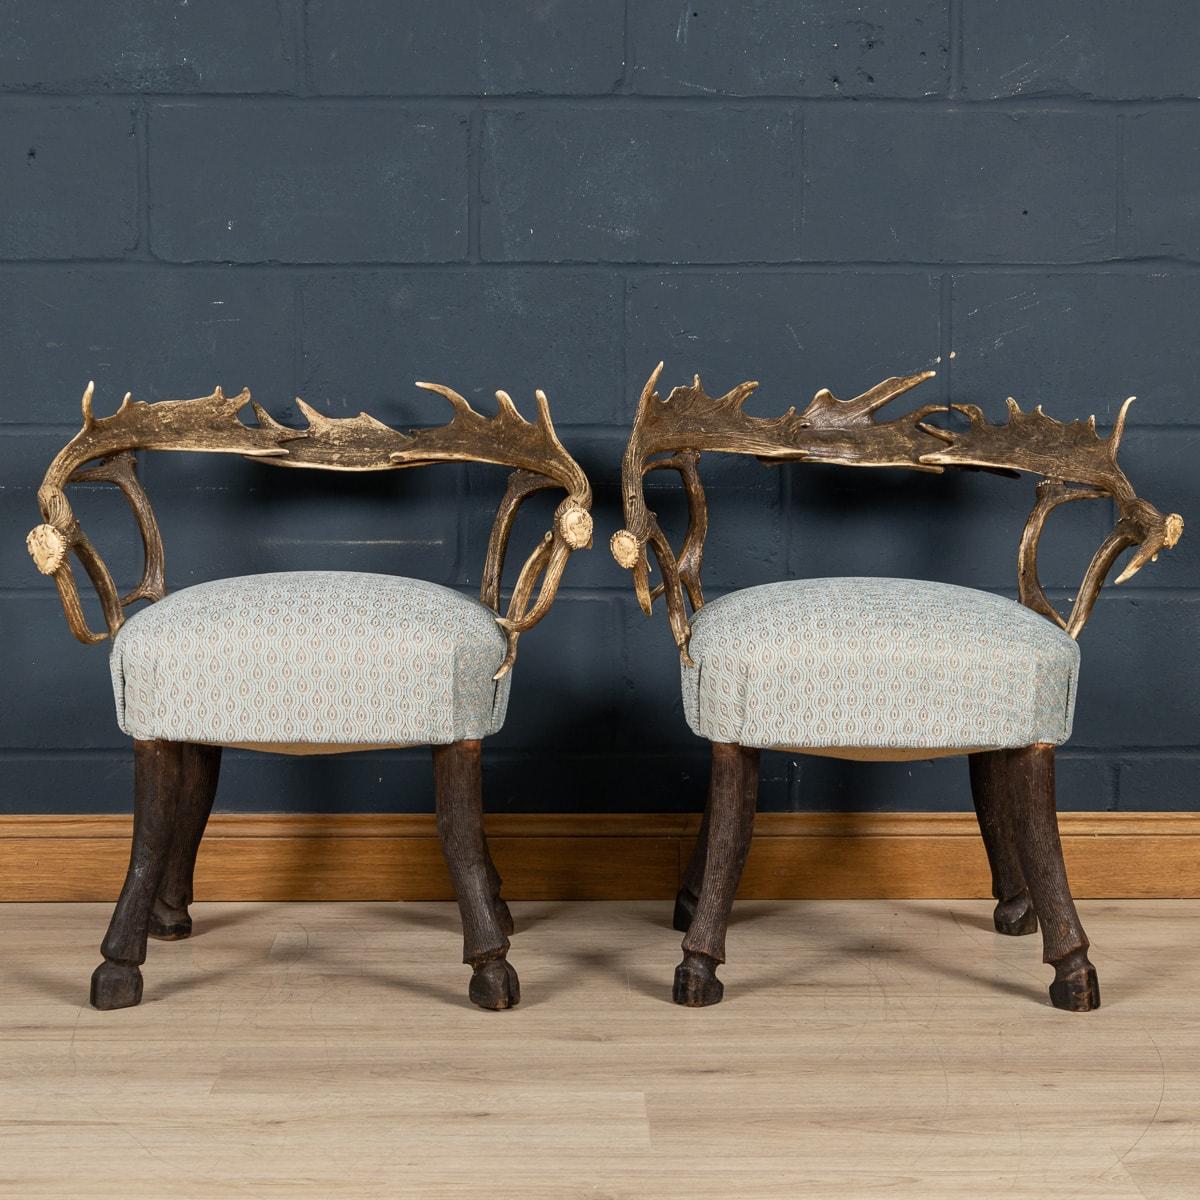 A very unusual pair of hall chairs or side chairs made in the Black Forest region of south-west Germany bordering Switzerland. The horns are intertwined and finished with carvings of Black Forest creatures to the ends, whilst the legs have been